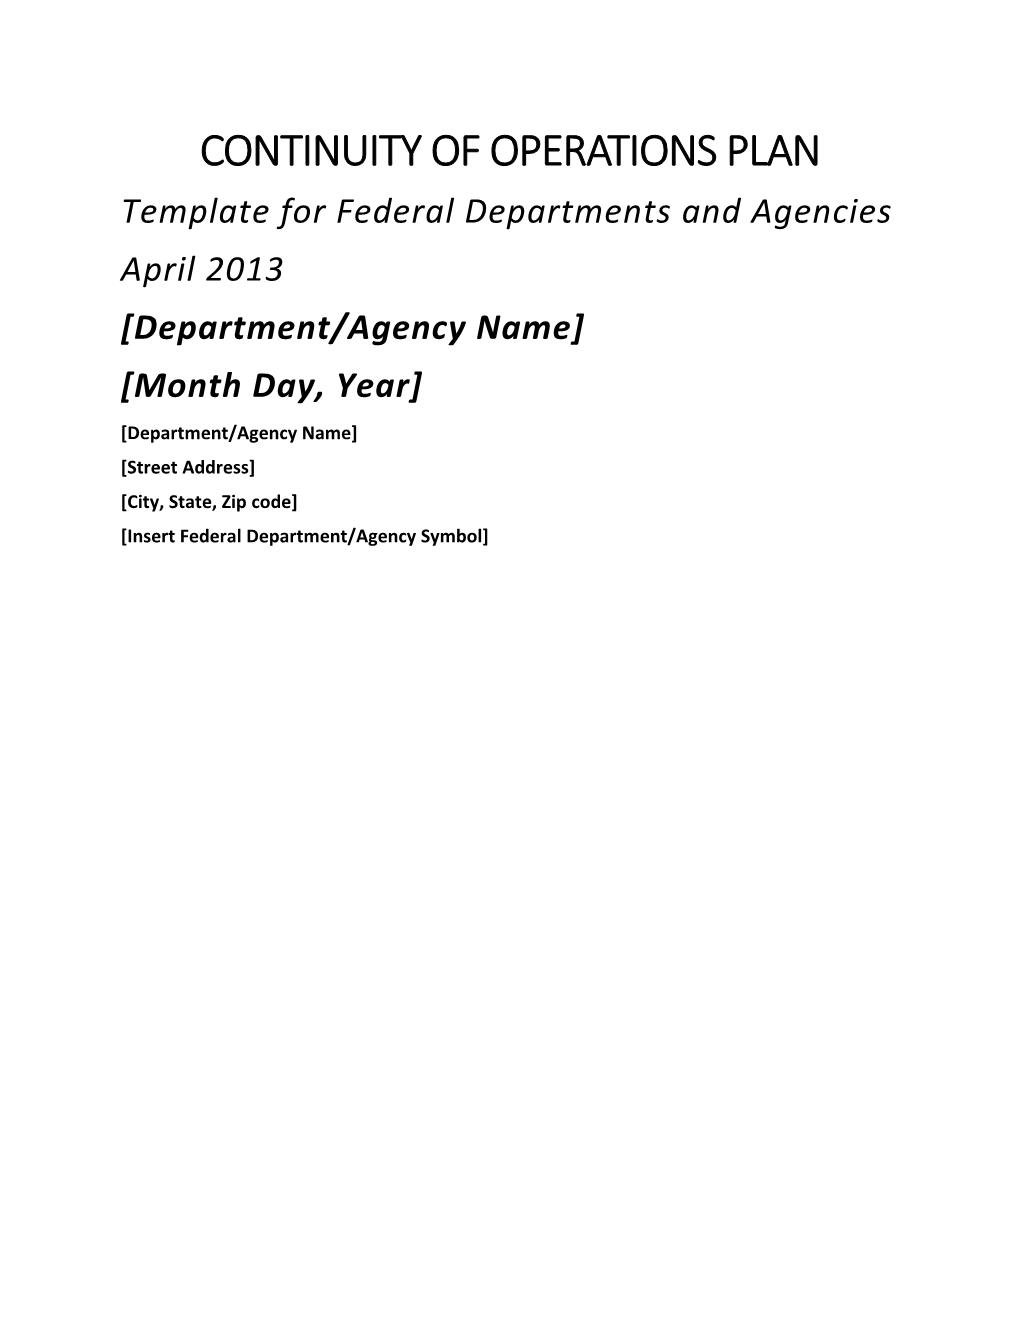 Template for Federal Departments and Agencies